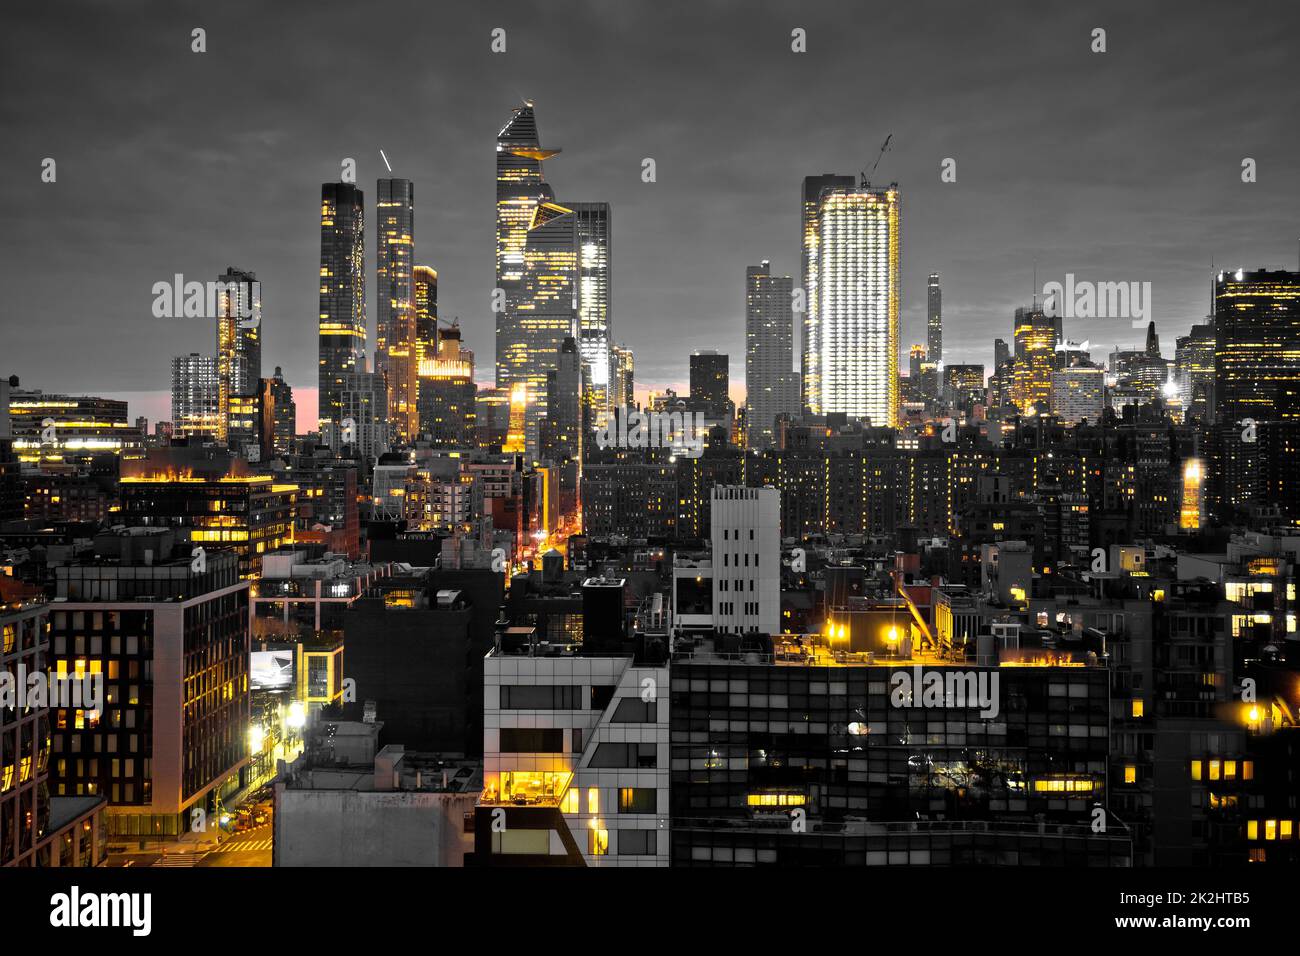 Epic skyline of New York City black and white night view with yellow lights Stock Photo